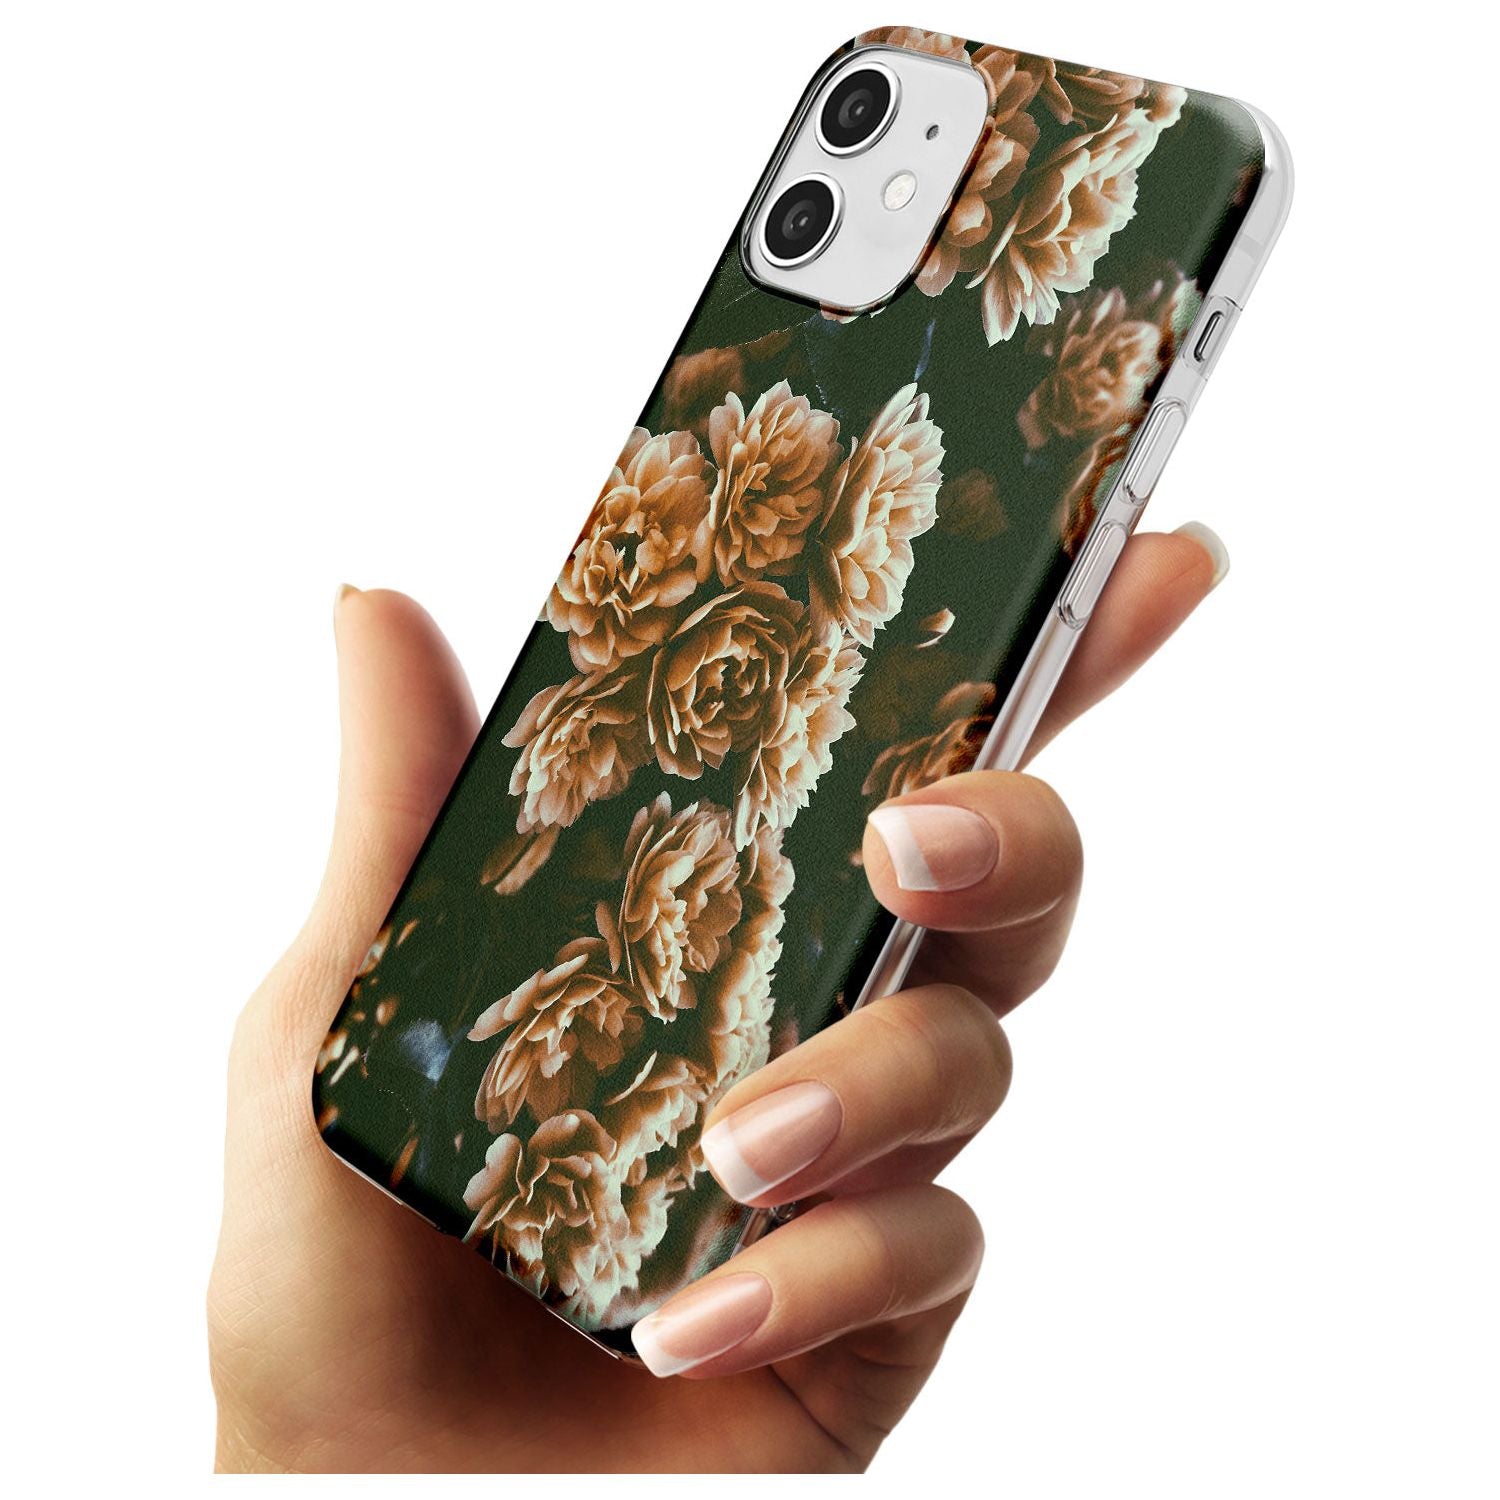 White Peonies - Real Floral Photographs Slim TPU Phone Case for iPhone 11